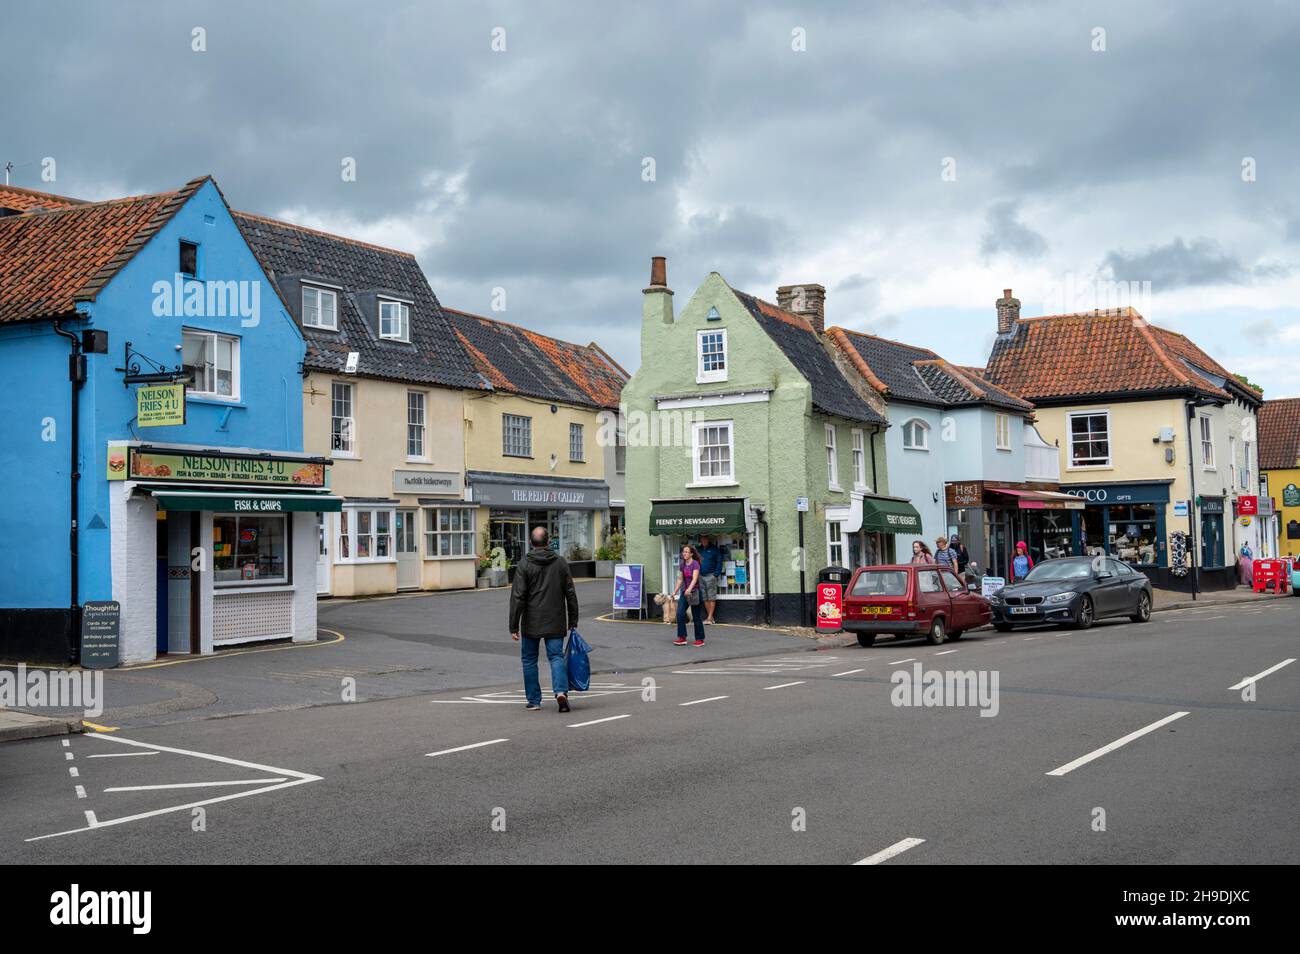 The main high street with shops, and parked cars in the market town of Holt, Norfolk, UK Stock Photo